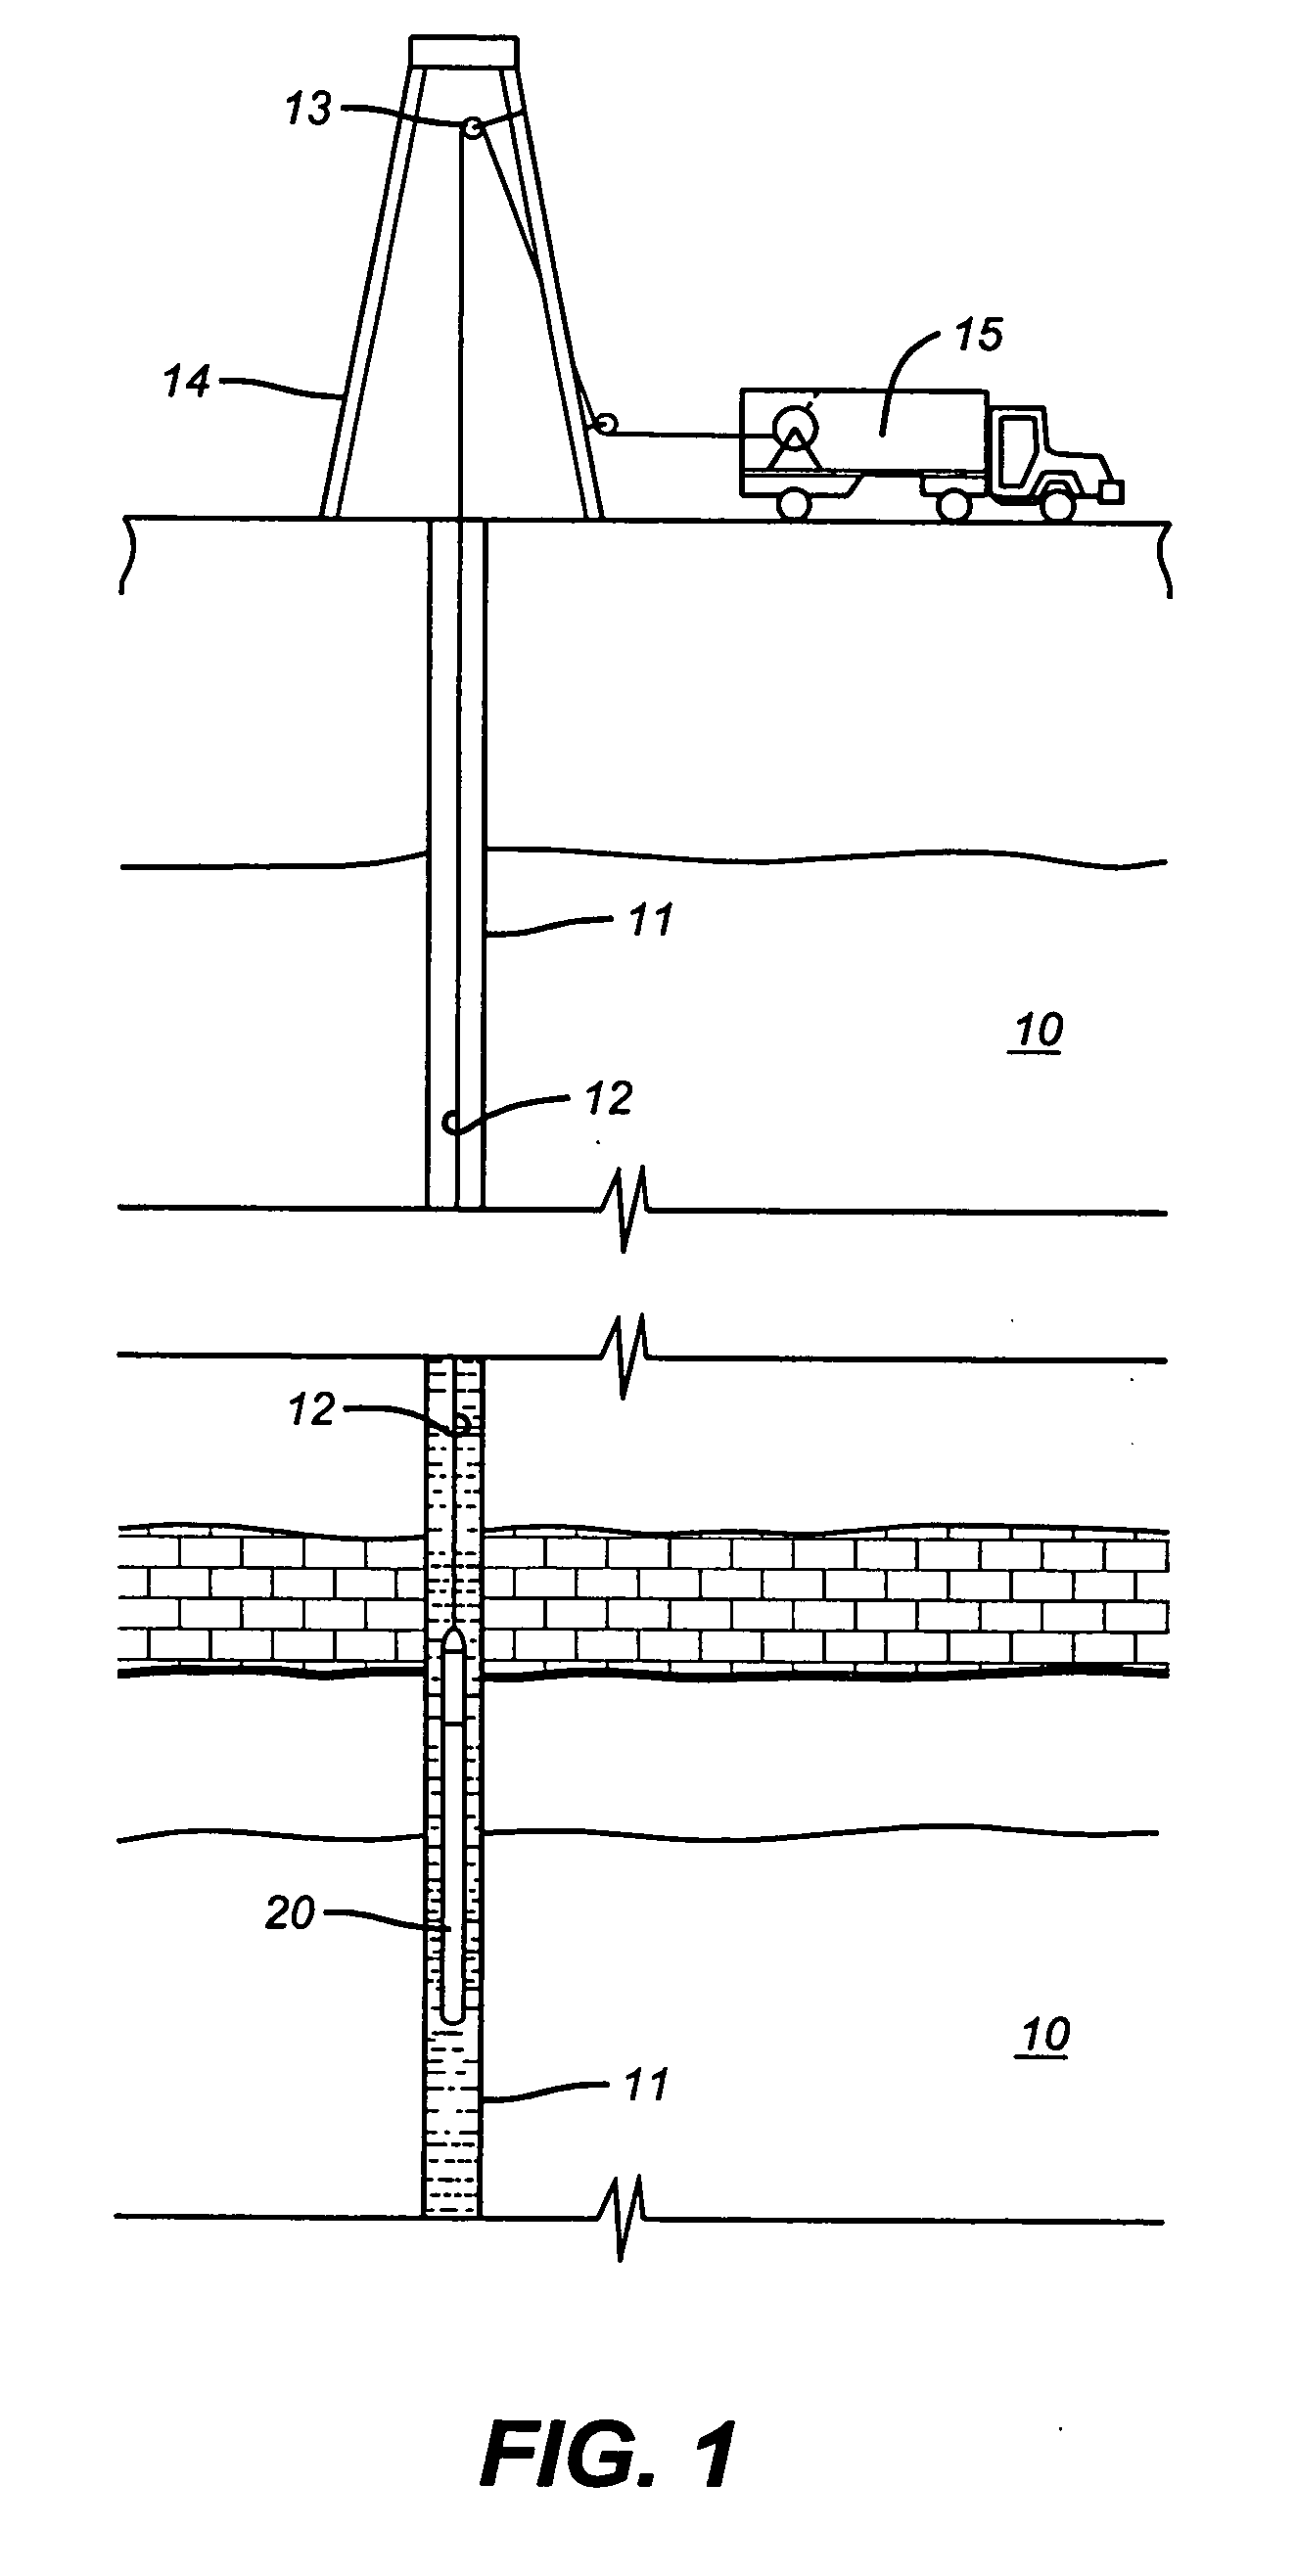 Method and apparatus for obtaining a micro sample downhole